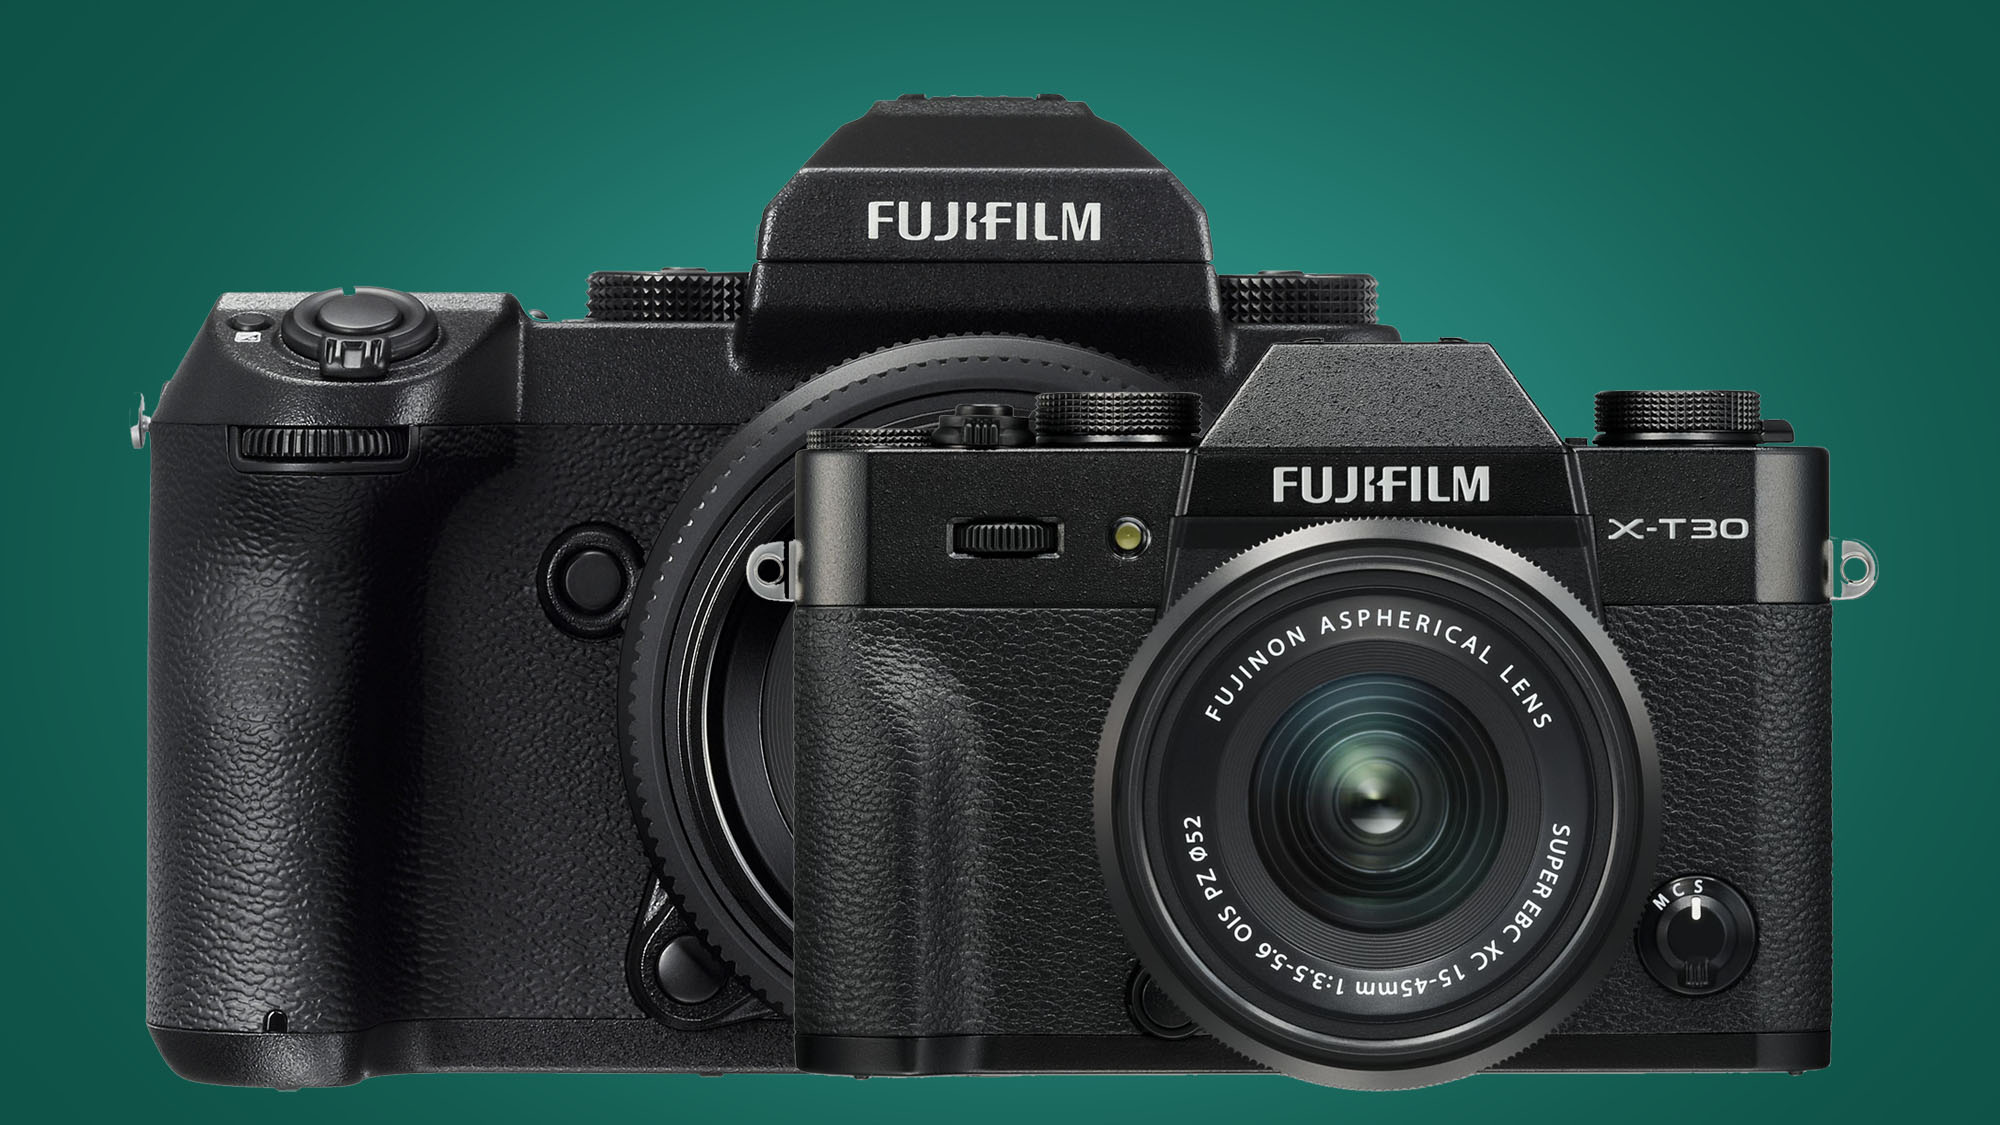 Fujifilm's rumored double launch could reveal longawaited camera